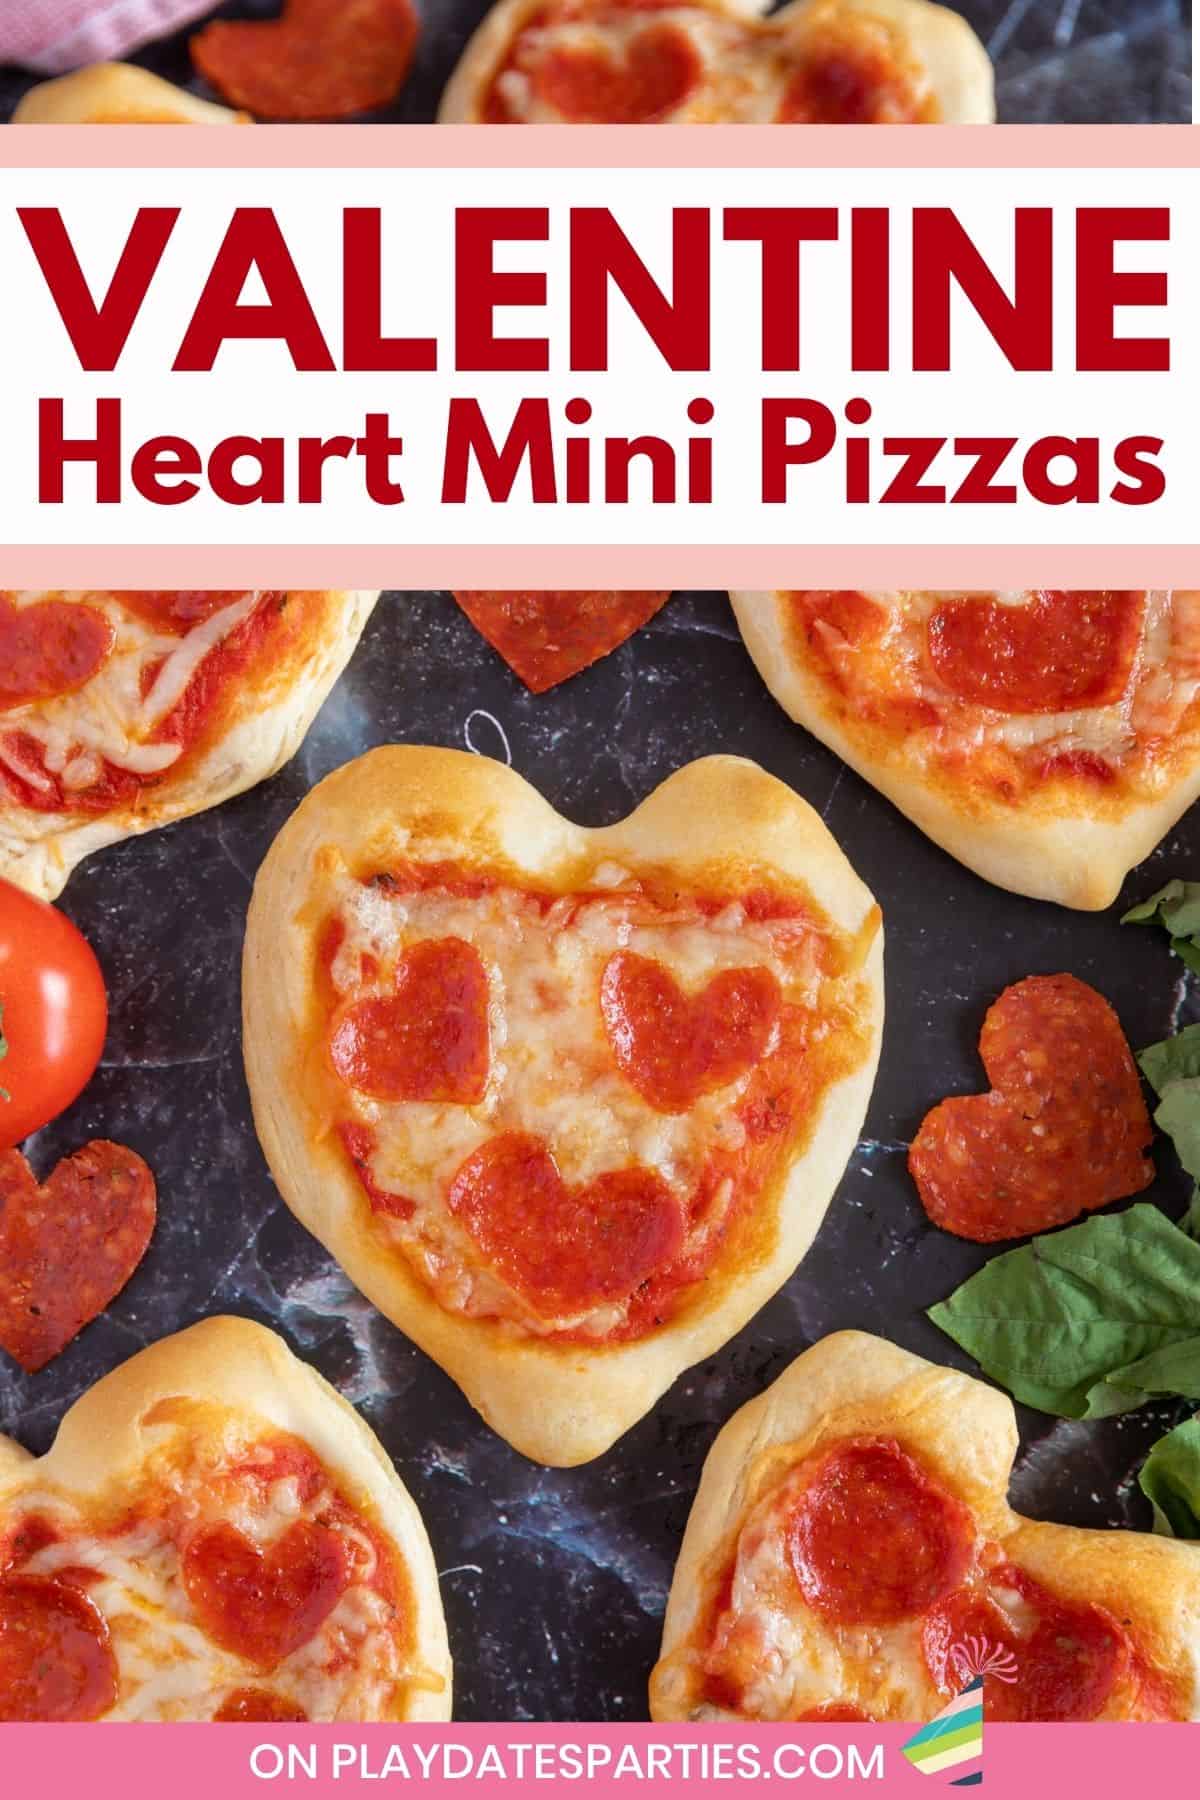 Pizzas on a marble surface with text overlay Valentine Heart Mini Pizzas.